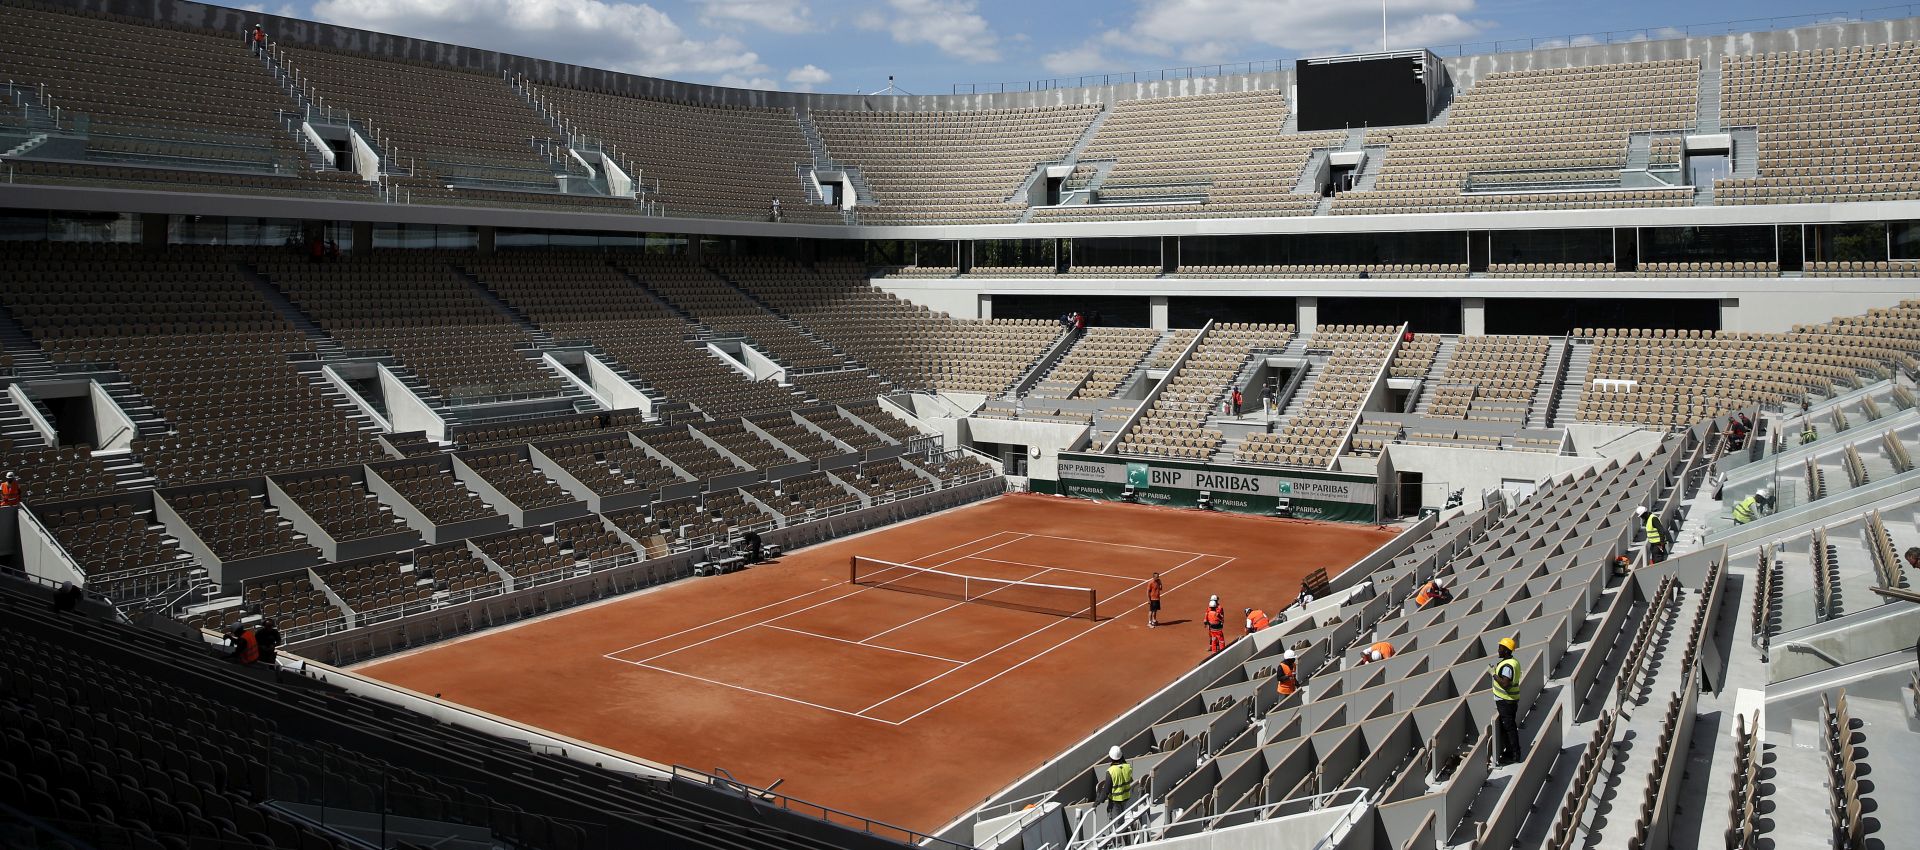 epa08413400 (FILE) - General view of the new Central court at Roland Garros in Paris, France, 16 May 2019. The French Open tennis tournament at Roland Garros in Paris will run from 26 May to 09 June 2019, re-issued 10 May 2020. The organisers of the French Open no longer rule out the possibility of holding the most important clay court tournament on the tennis calendar without spectators. "Organising the tournament behind closed doors would allow part of the business model, the servicing of the television rights, to take place. This should not be overlooked," said Bernard Giudicelli, President of the French Tennis Federation FFT. Most recently, France's Minister of Sport, Roxana Maracineanu, clearly rejected the idea of holding the Grand Slam tournament without spectators.  EPA/YOAN VALAT *** Local Caption *** 55198323